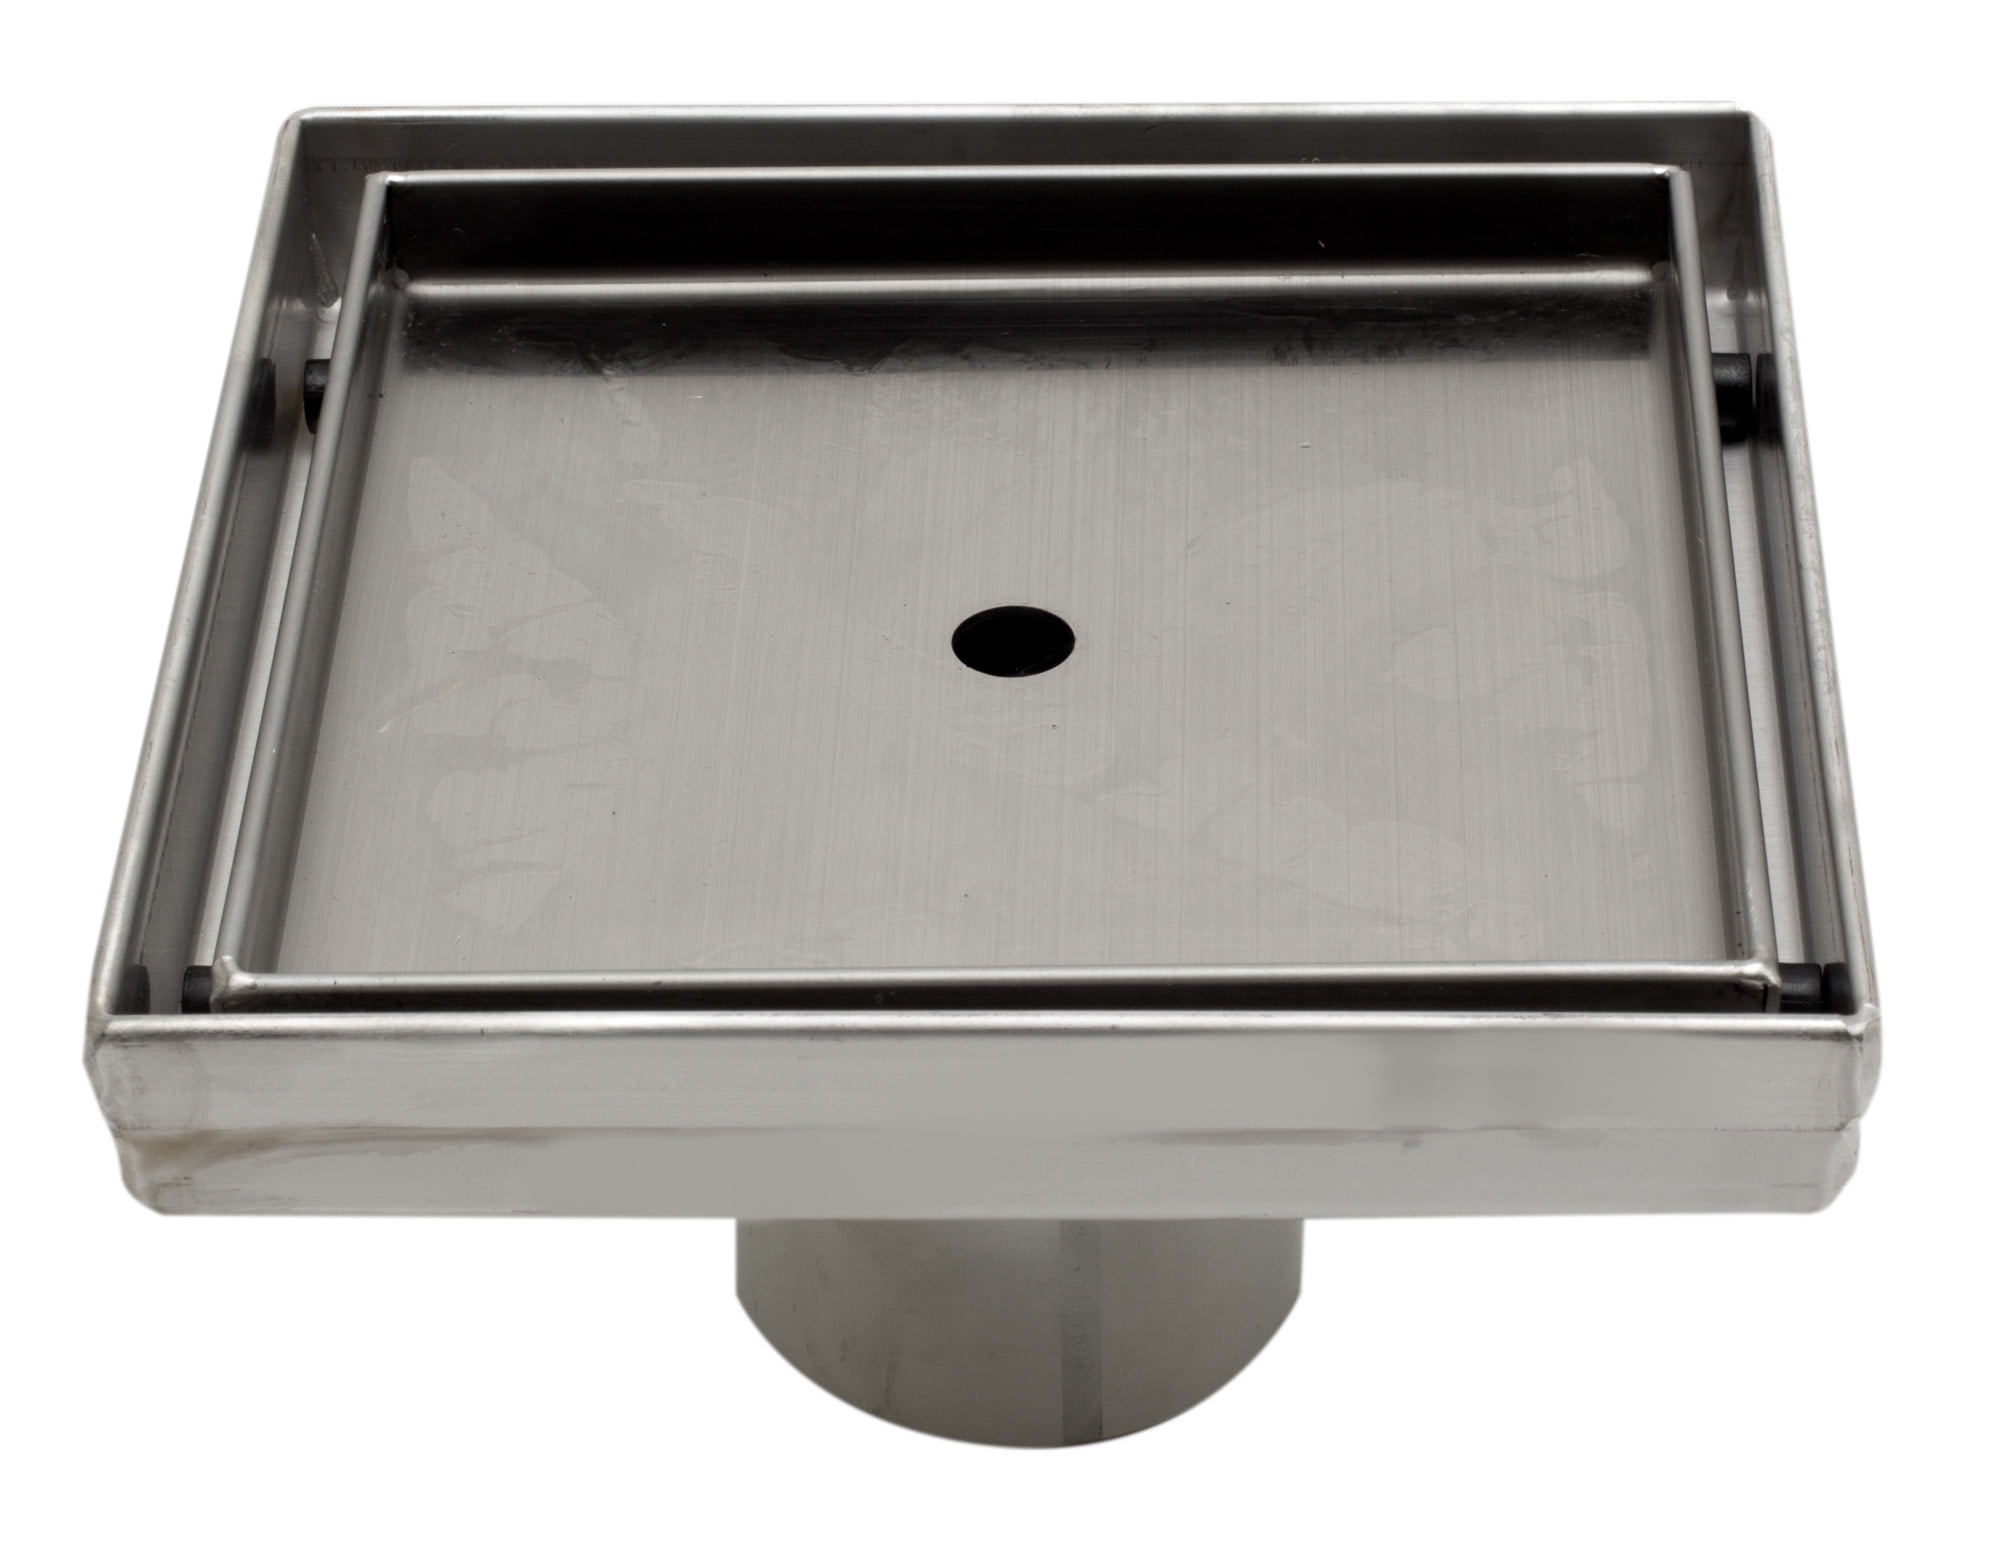 Picture of ALFI brand ABSD55A 5 x 5 in. Modern Square Stainless Steel Shower Drain with Cover